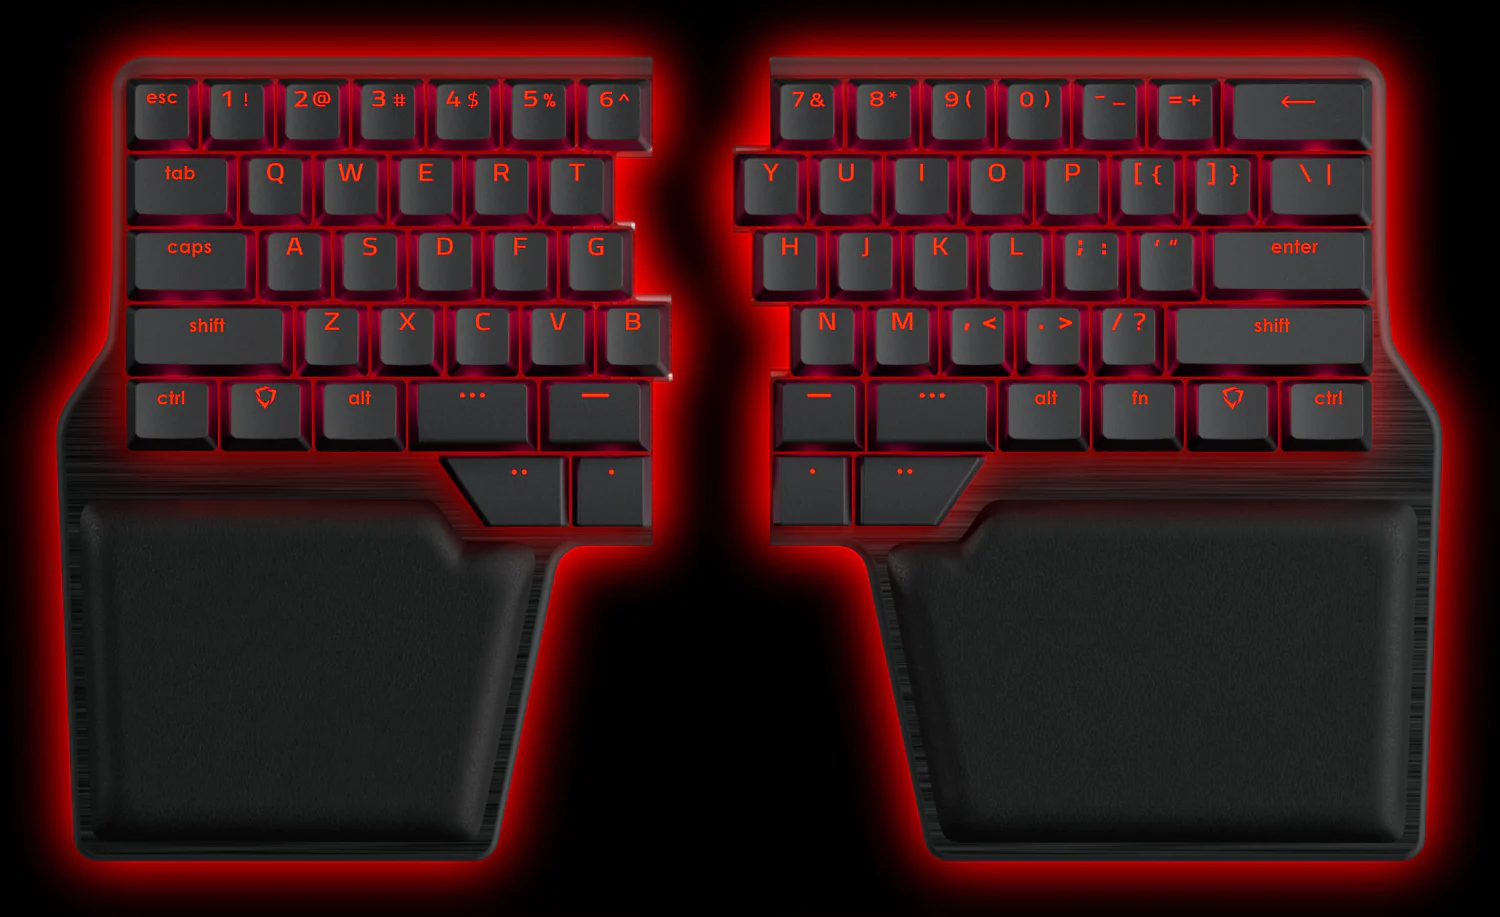 Dygma Raise keyboard which is a split keyboard with many customizable keys around where your thumbs would rest